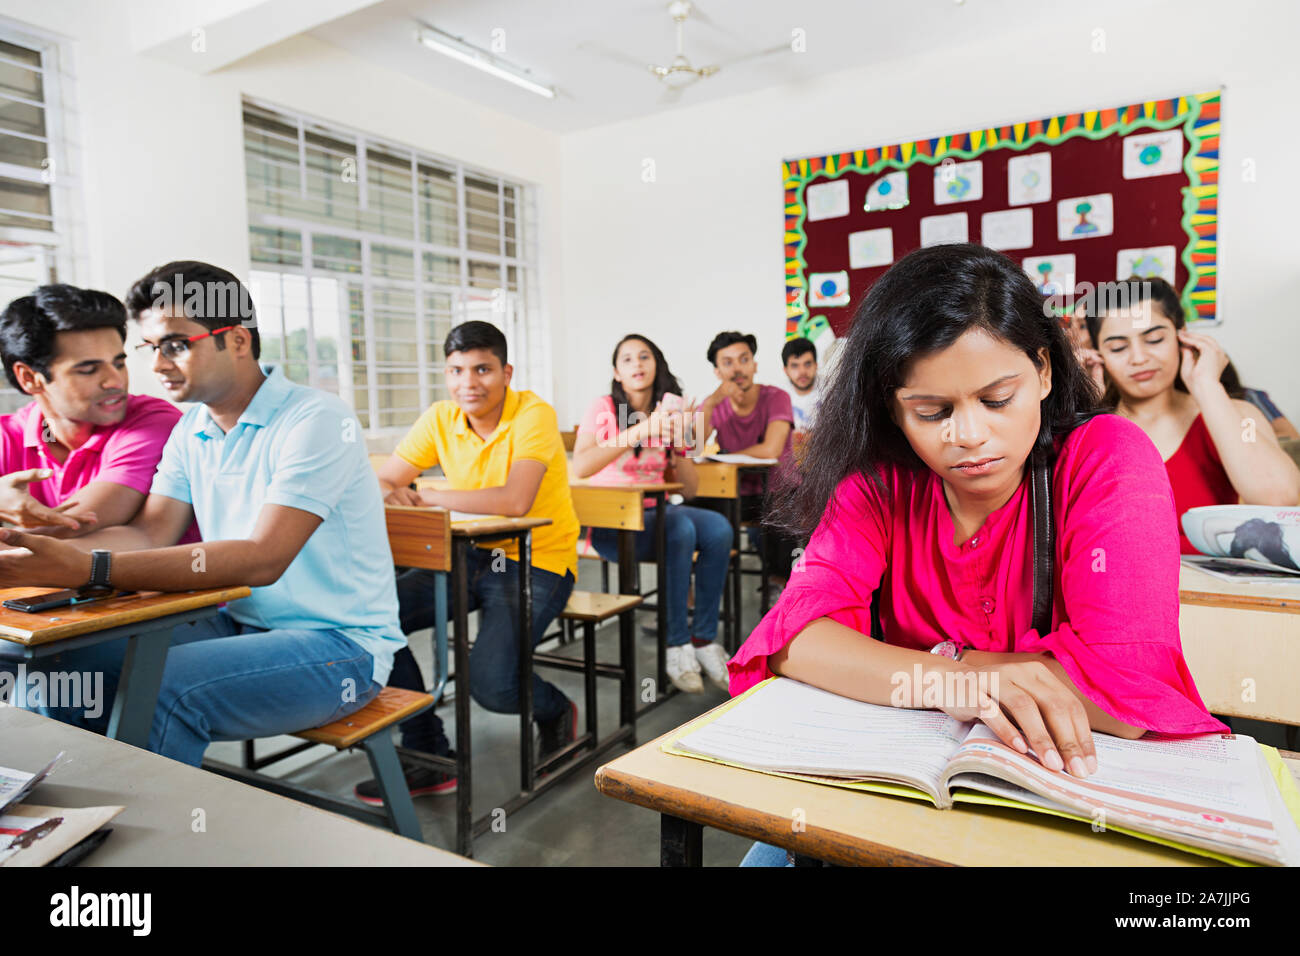 Young Female College Student Reading Book Studying With Classmates Preparing Exam In-Classroom Stock Photo